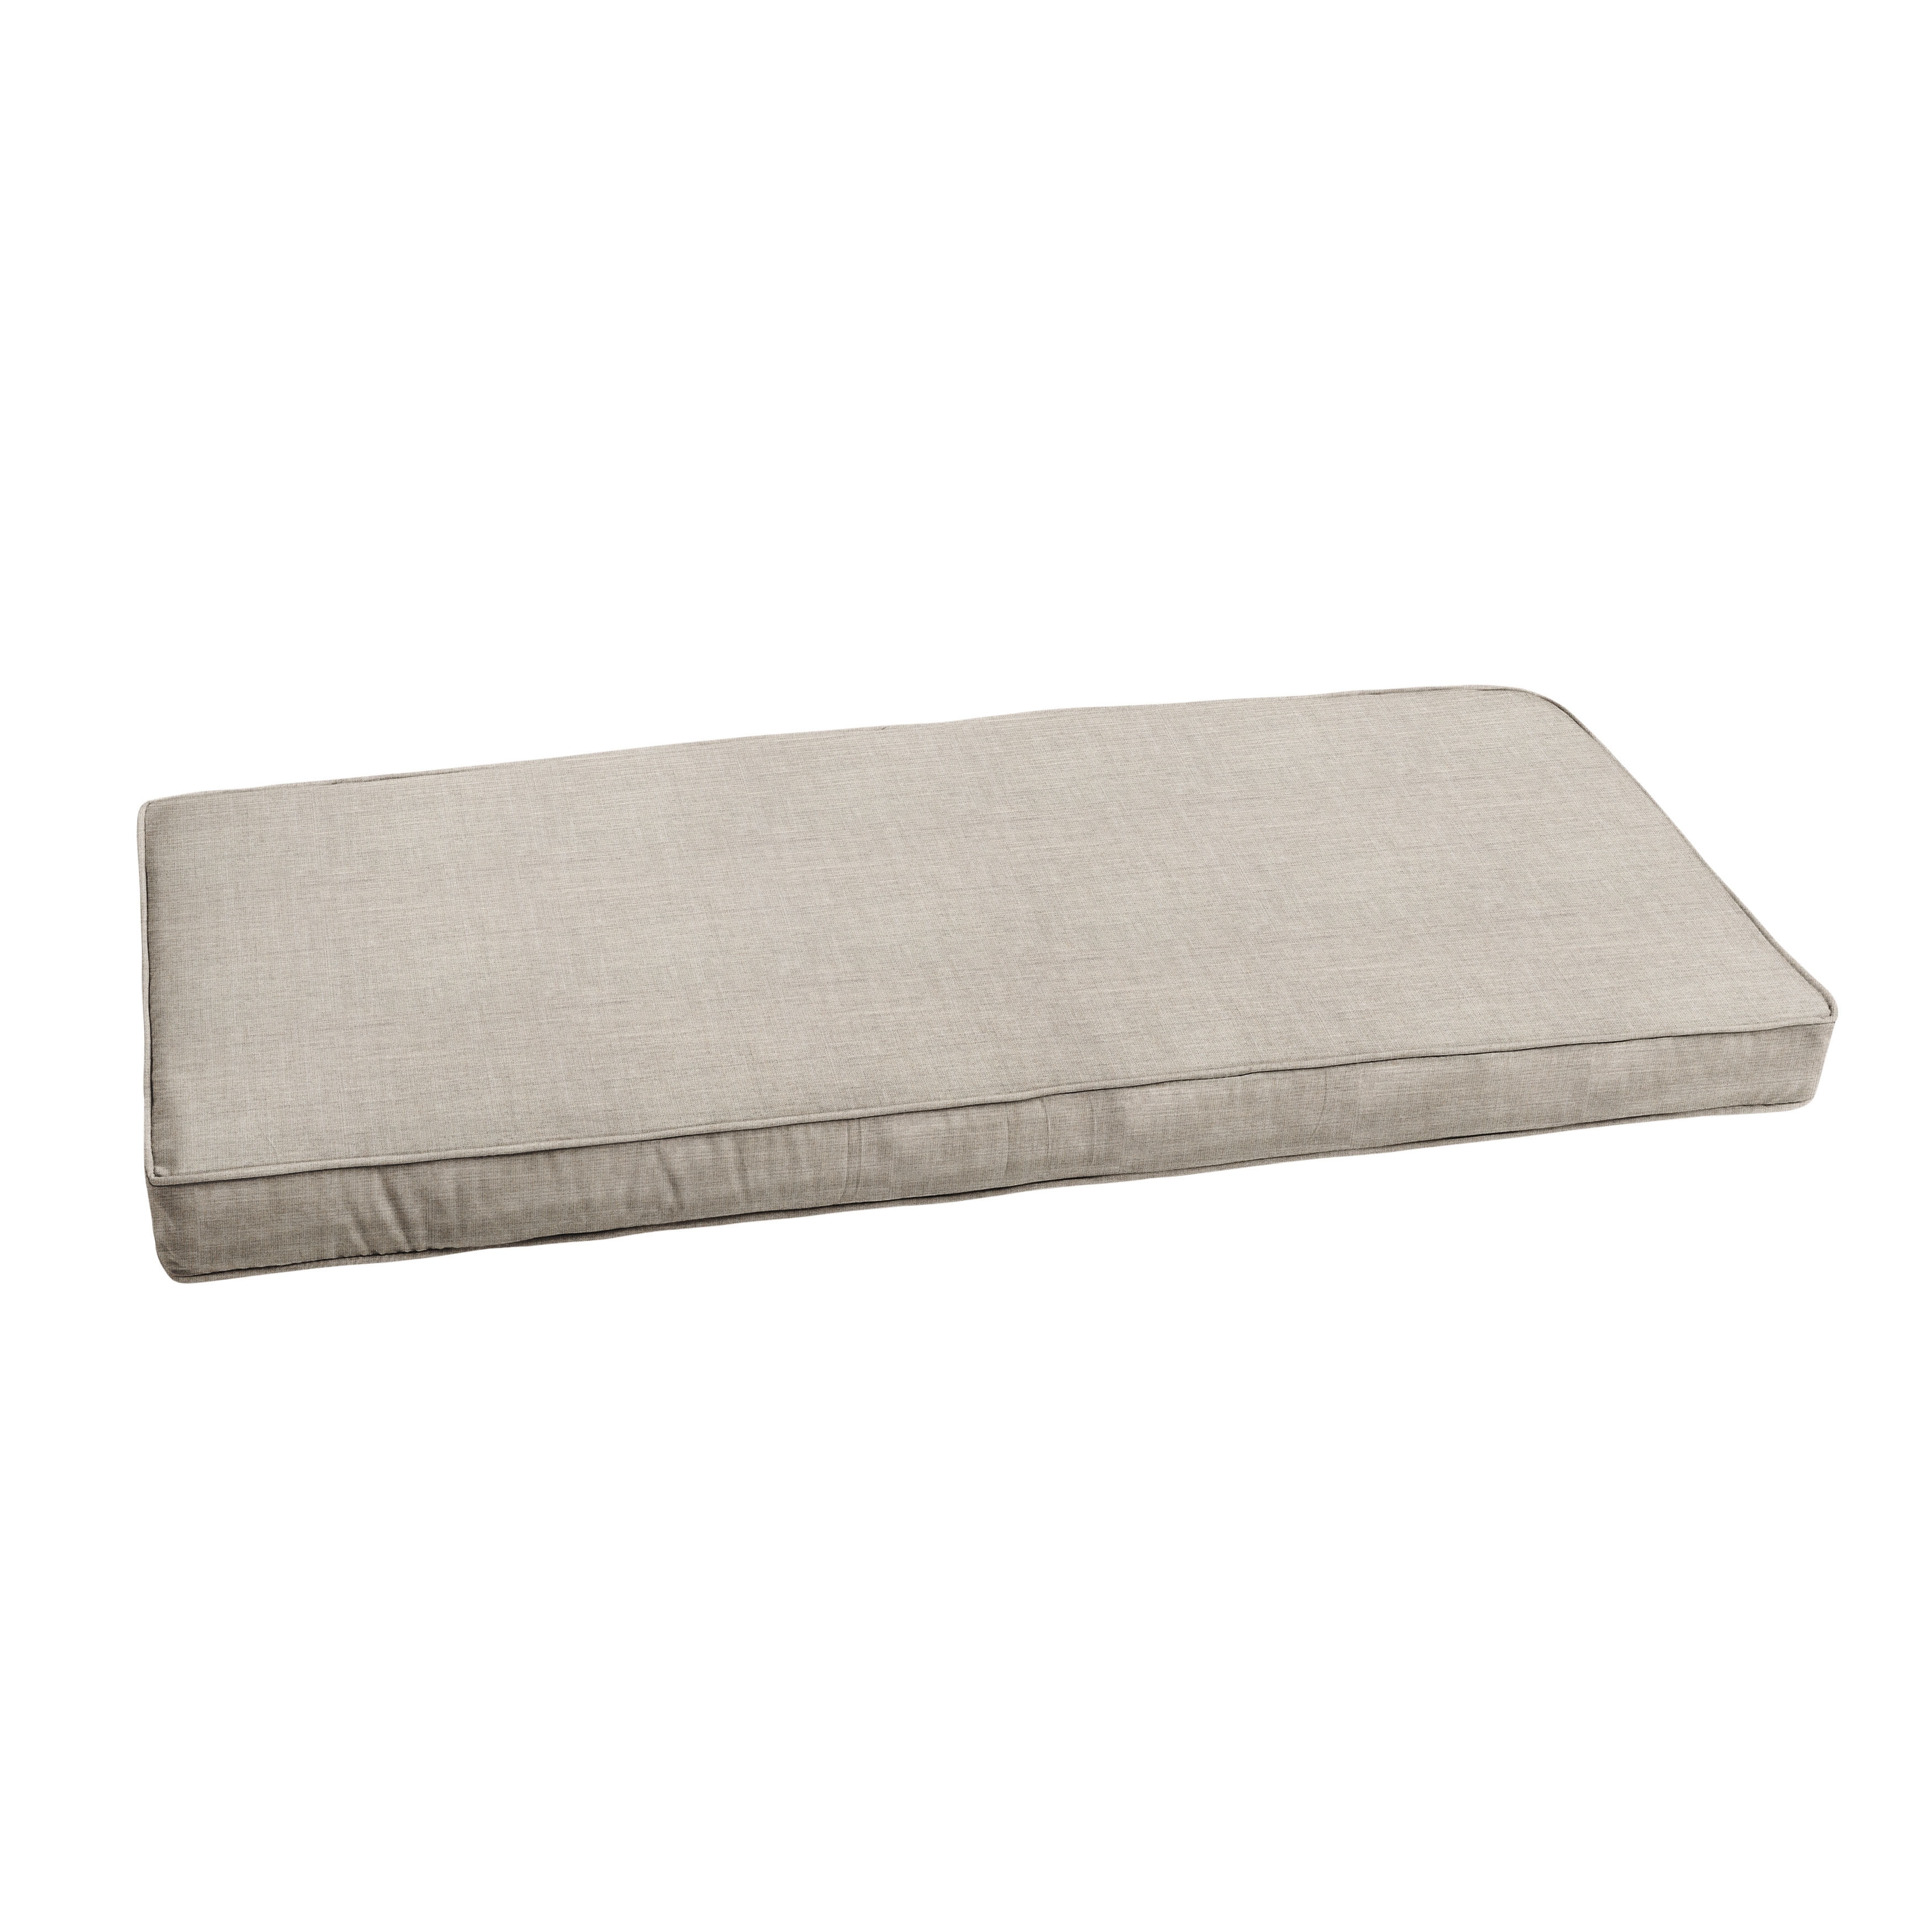 Sunbrella Silver Grey Indoor Outdoor Bench Cushion By Humble Haute On Sale Overstock 20192754